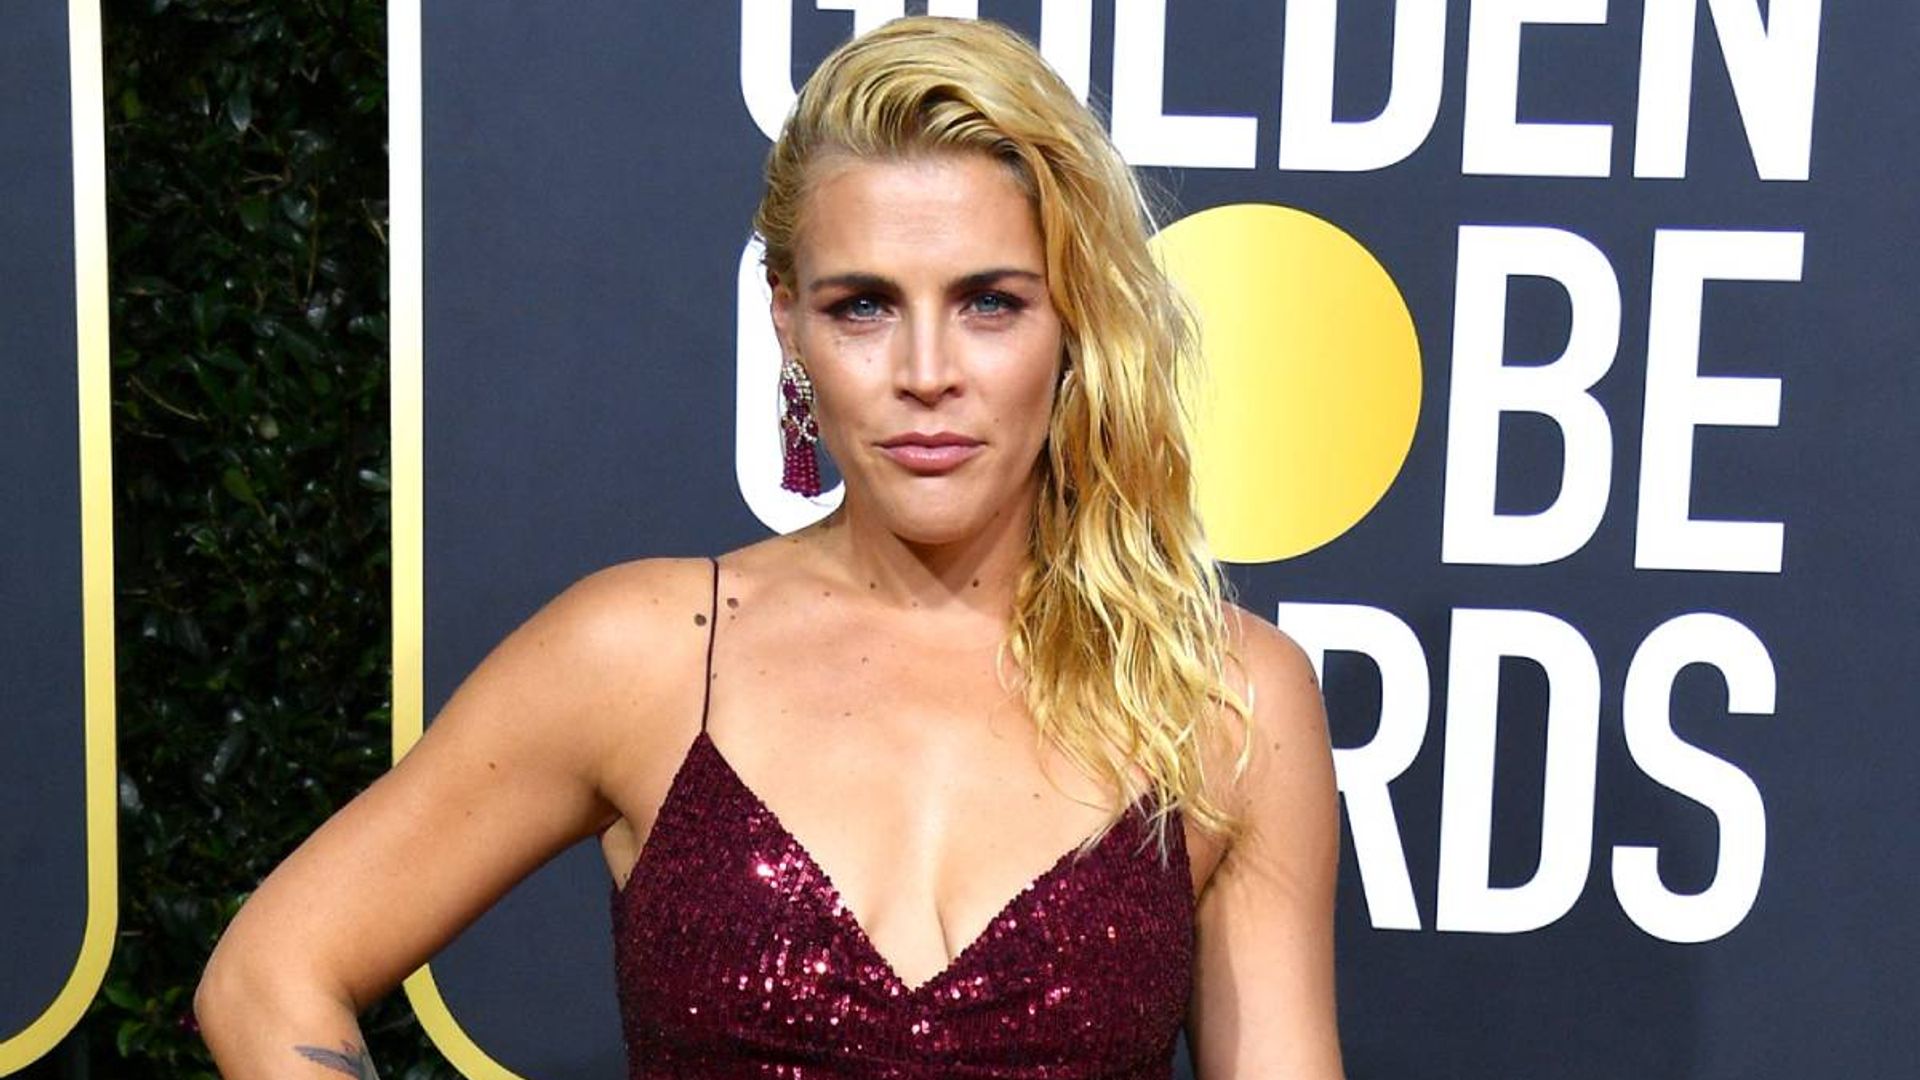 Busy Philipps surprises fans with appearance in unearthed photos